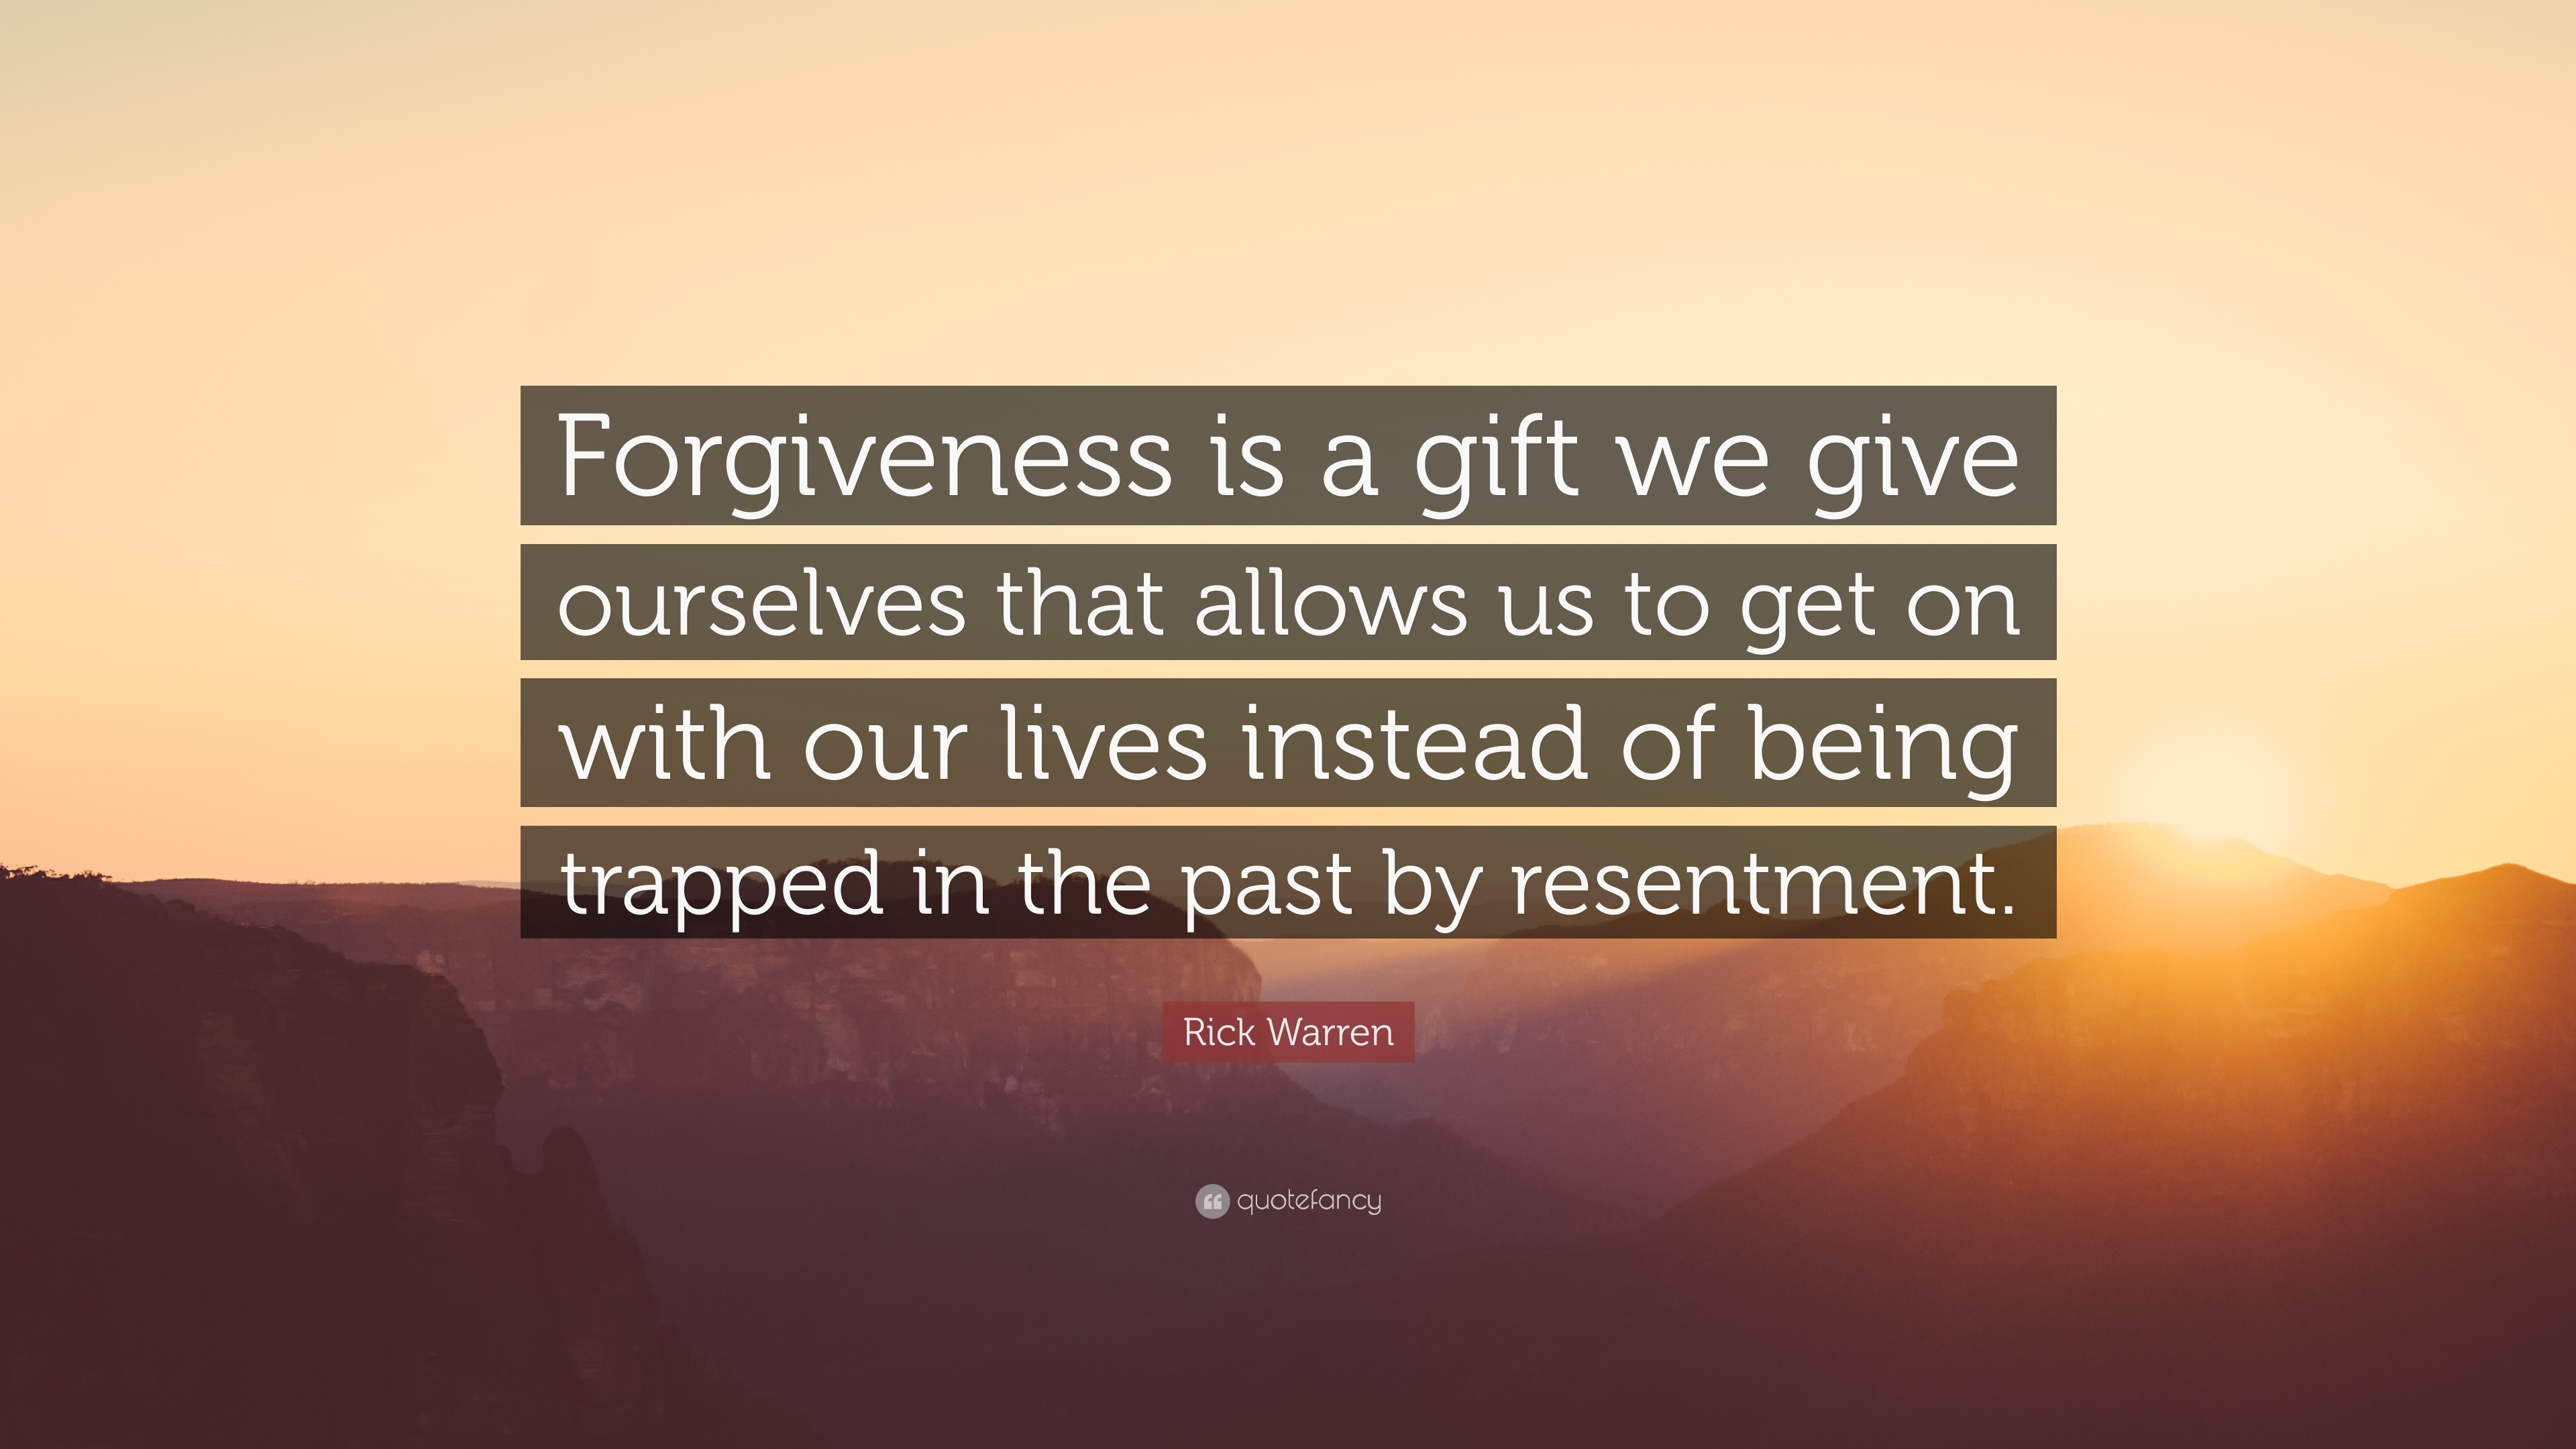 Rick Warren Quote: “Forgiveness is a gift we give ourselves that allows ...